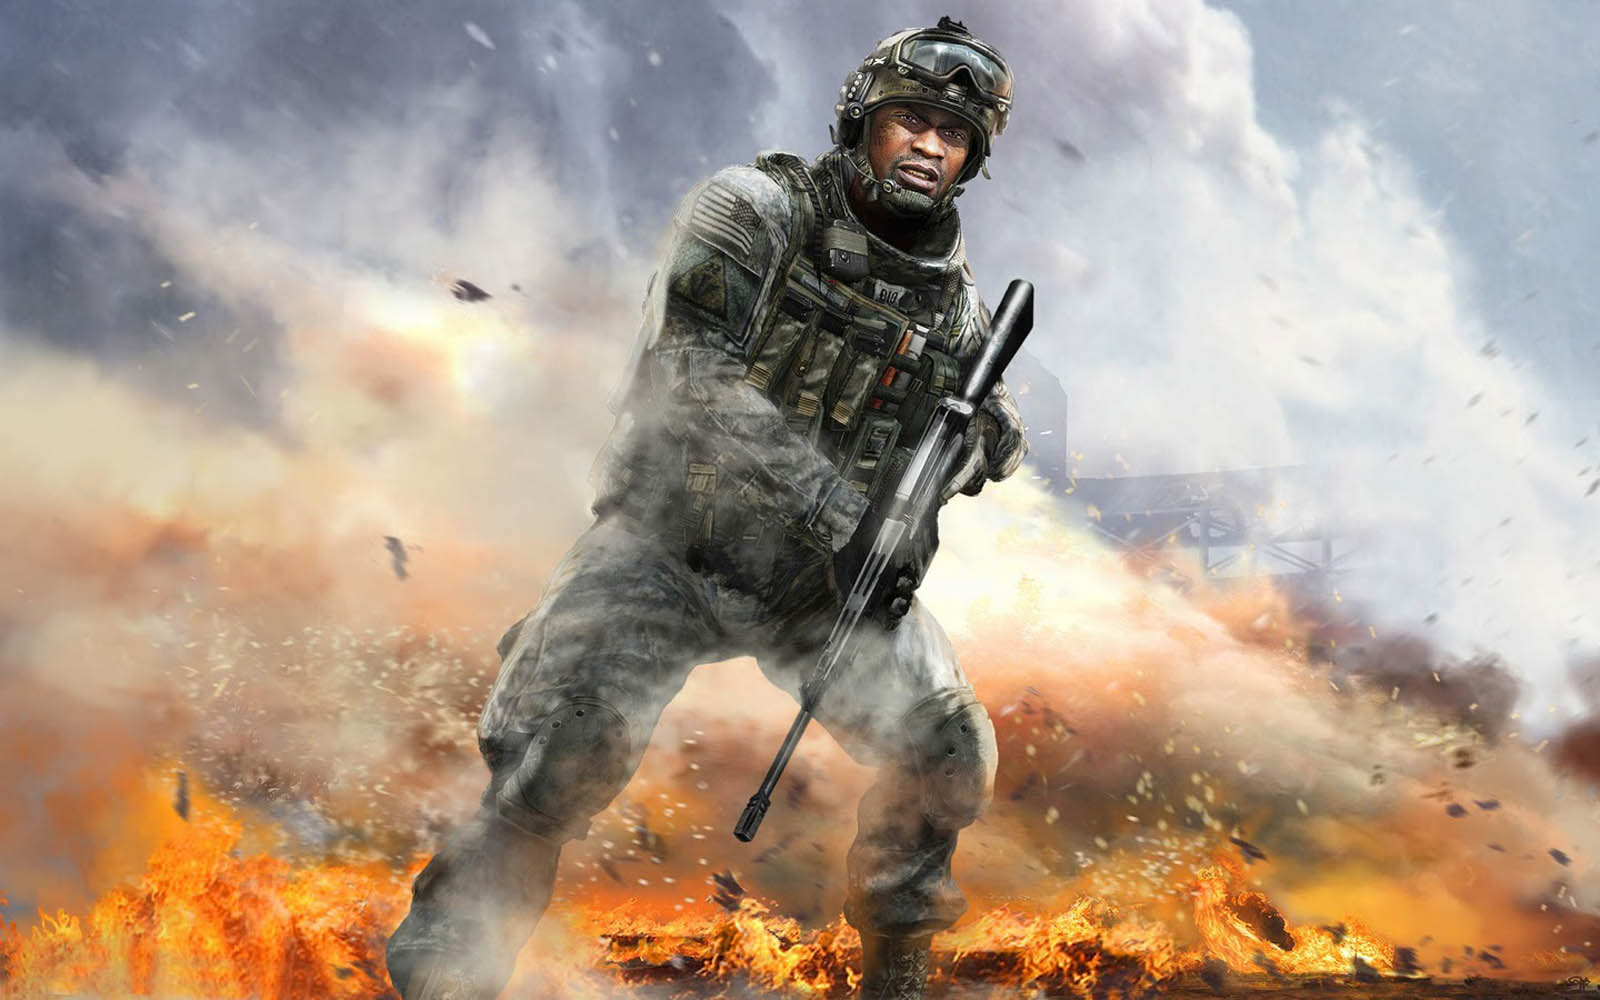 call wallpaper,soldier,event,army,explosion,movie